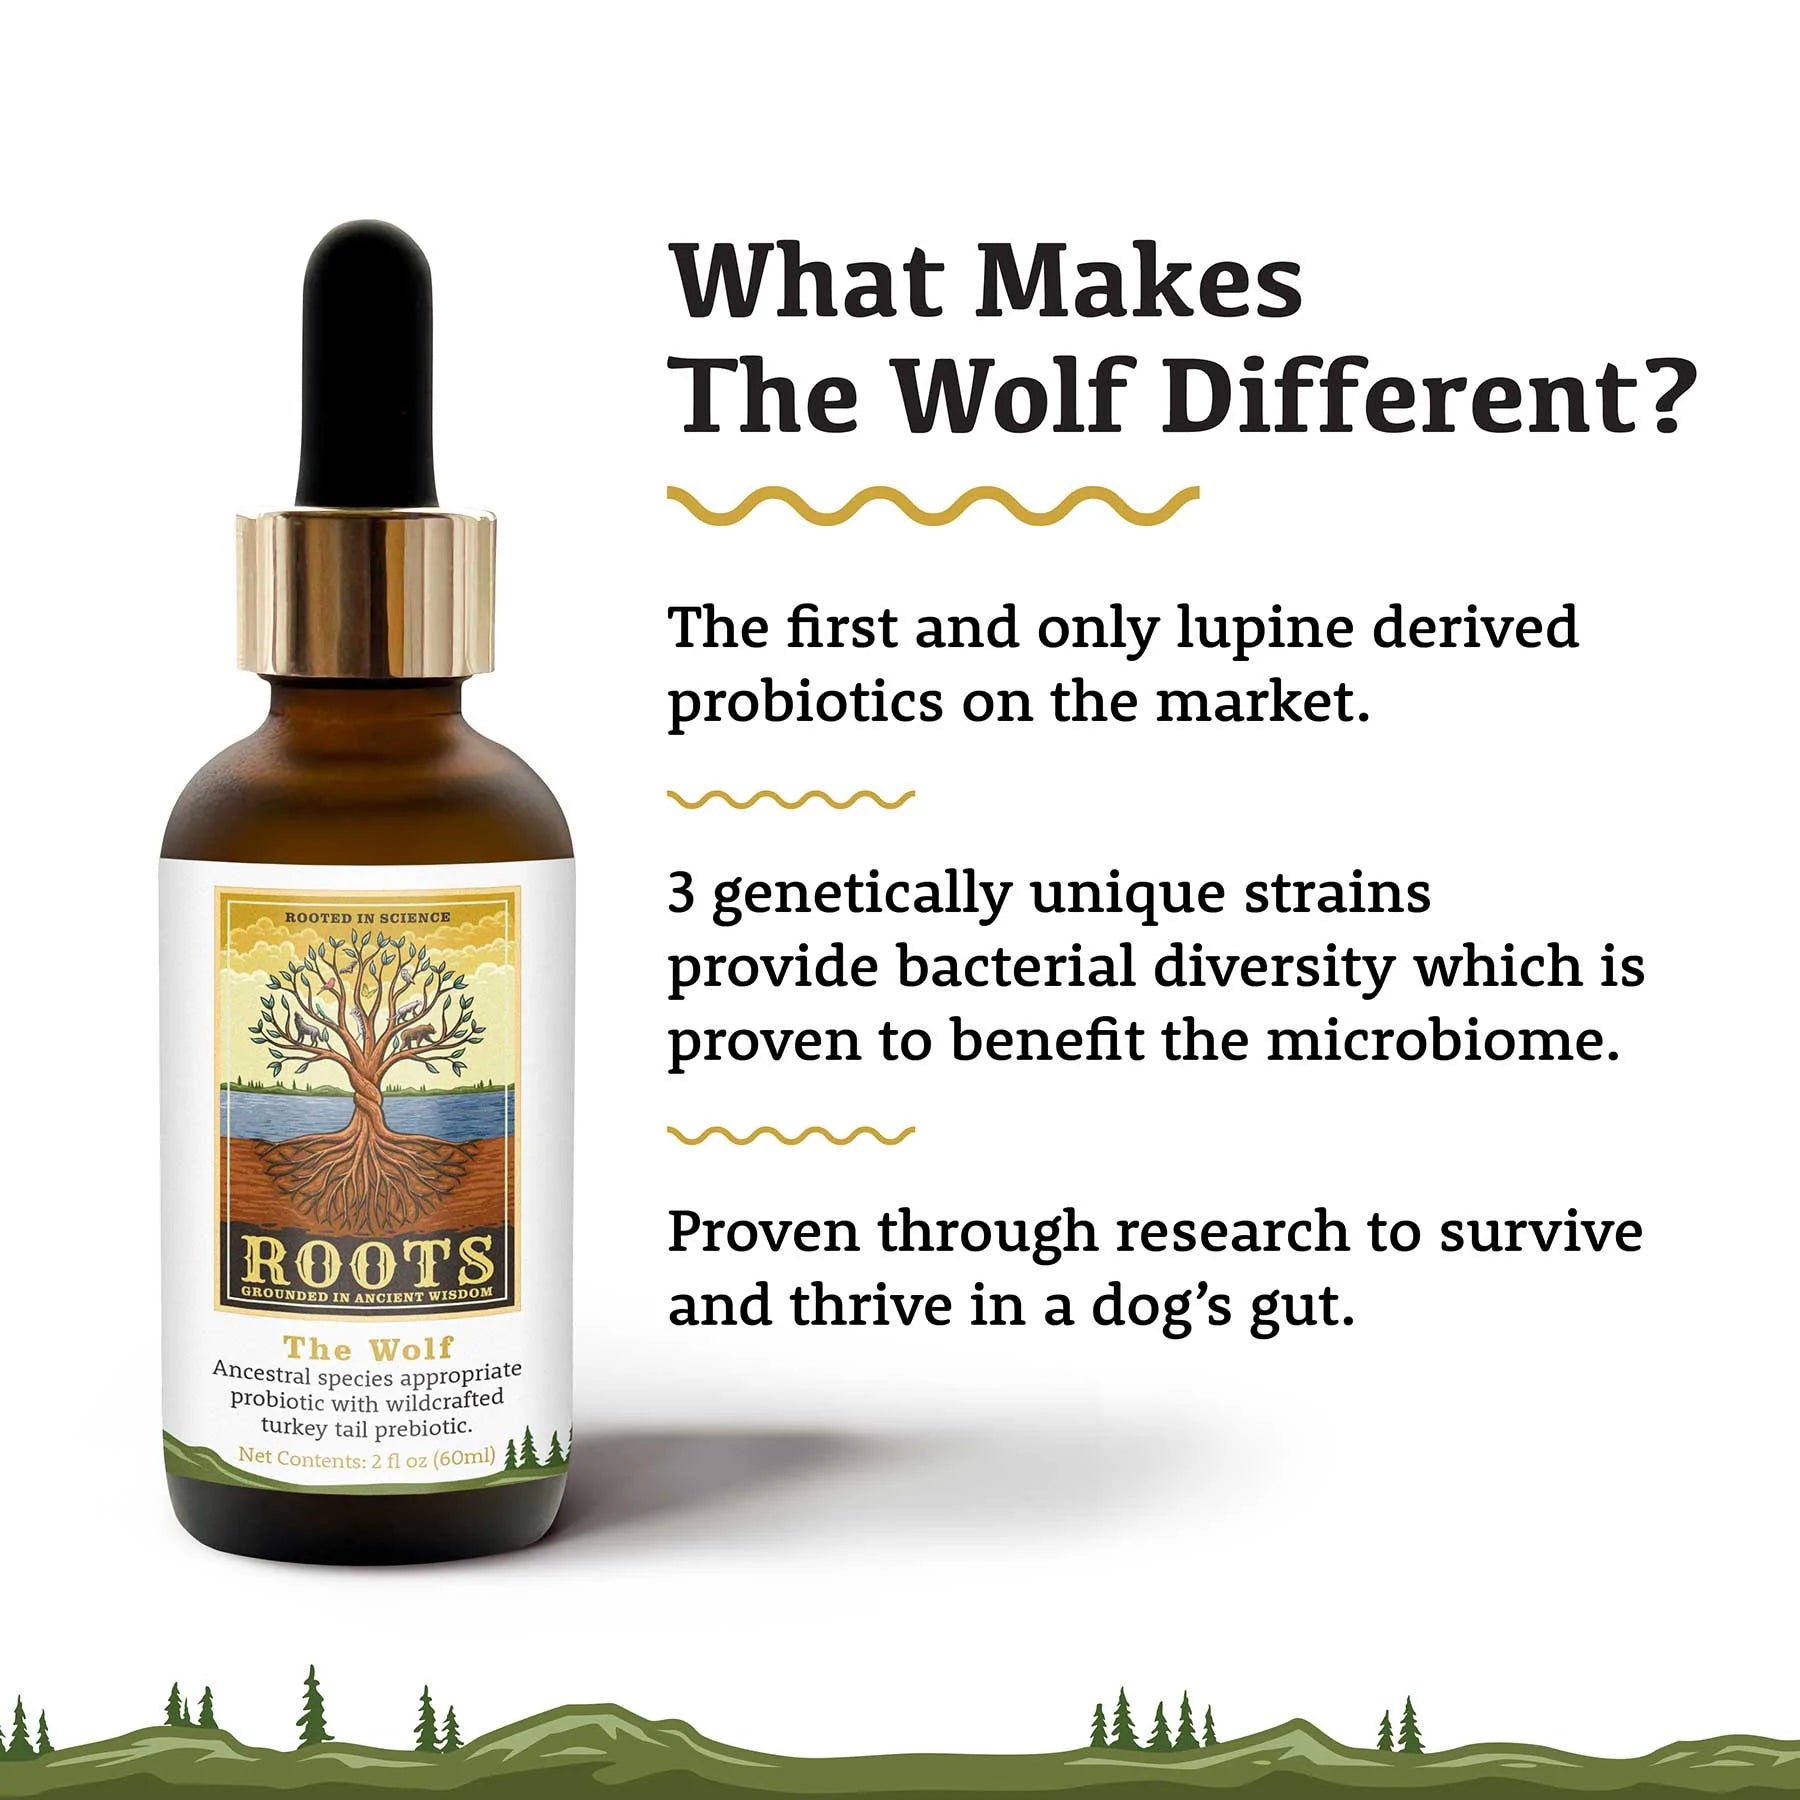 Adored Beast Roots - The Wolf -  Species Appropriate Probiotic - 60ml